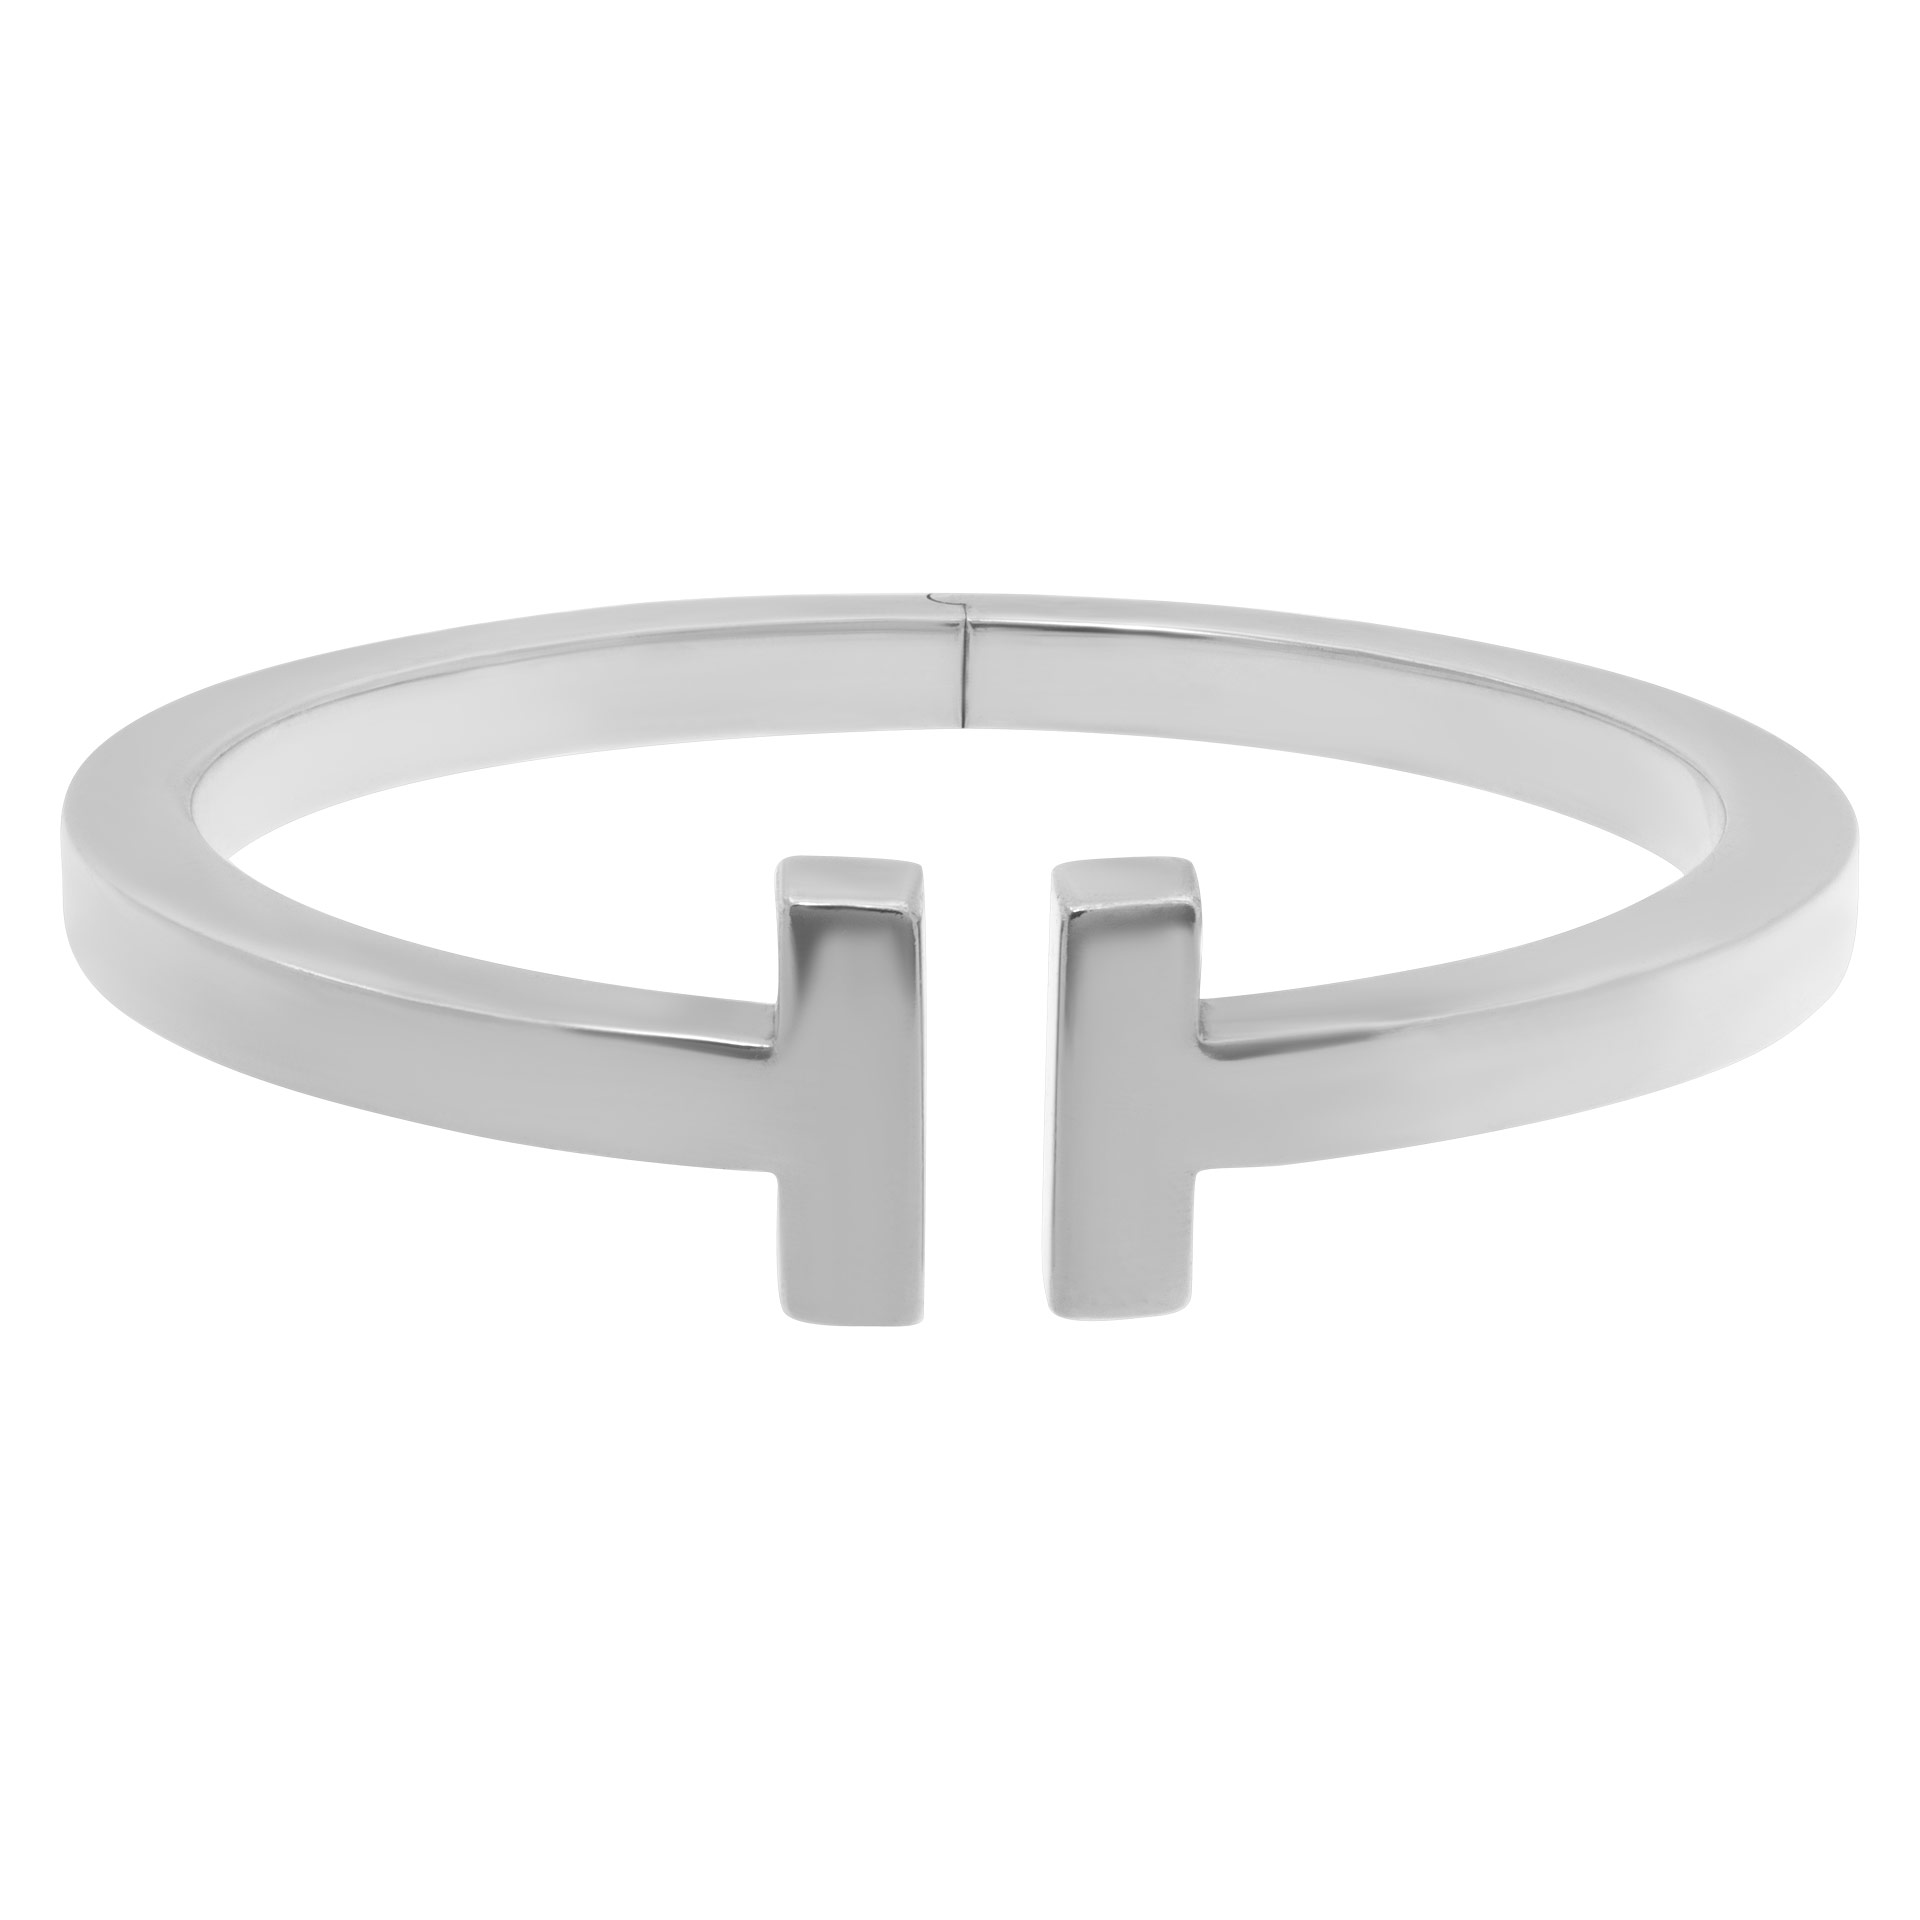 Tiffany and Co. Tsquare bracelet in sterling silver